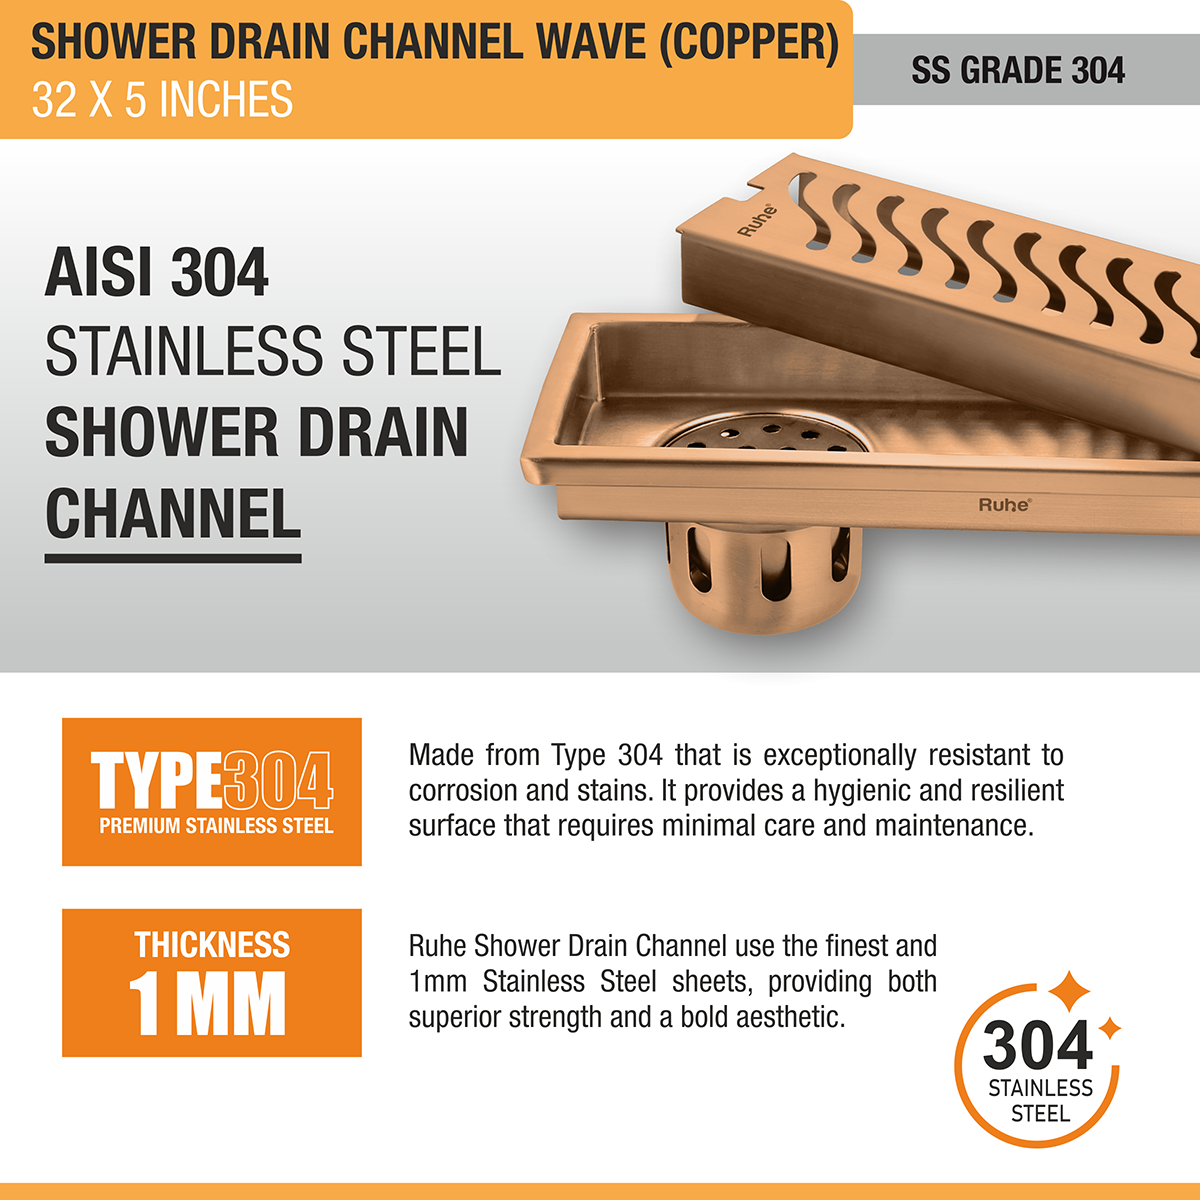 Wave Shower Drain Channel (32 x 5 Inches) ROSE GOLD/ANTIQUE COPPER stainless steel